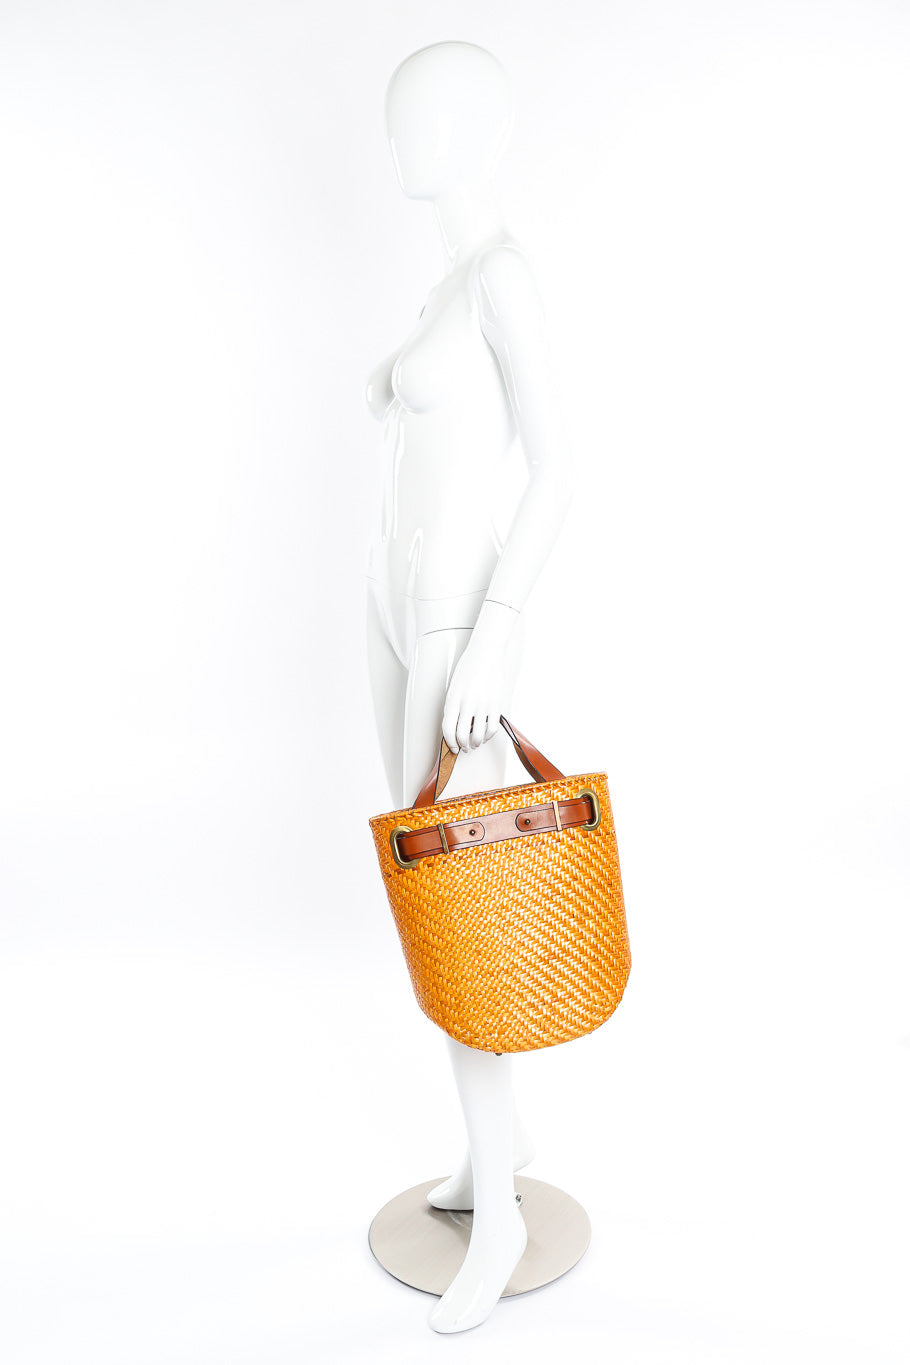 Vintage Rodo Wicker and leather tote bag on mannequin @recessla